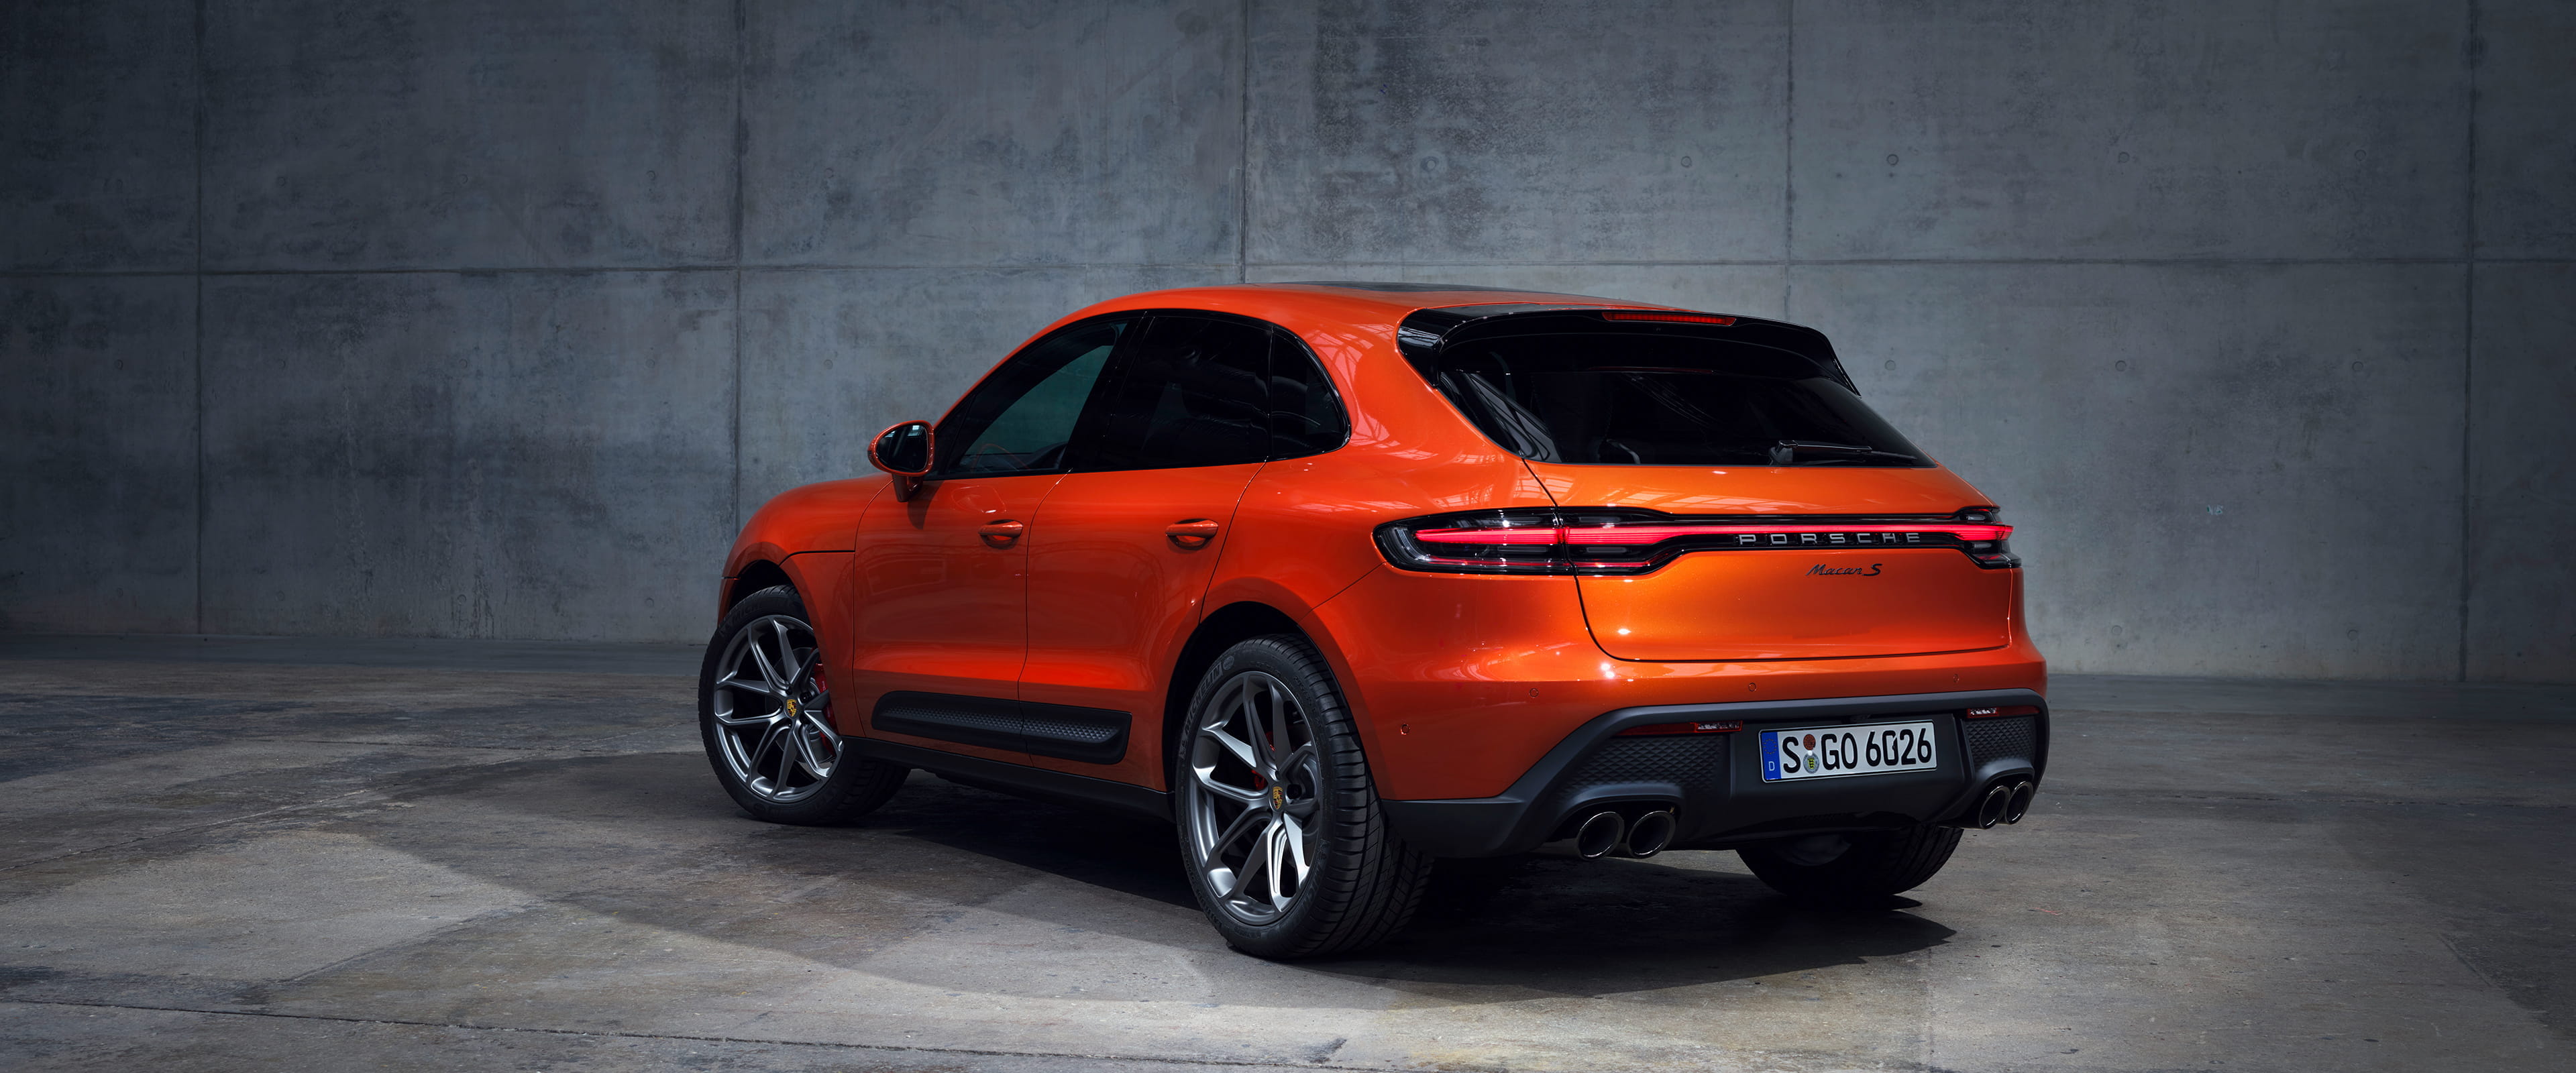 The new Macan